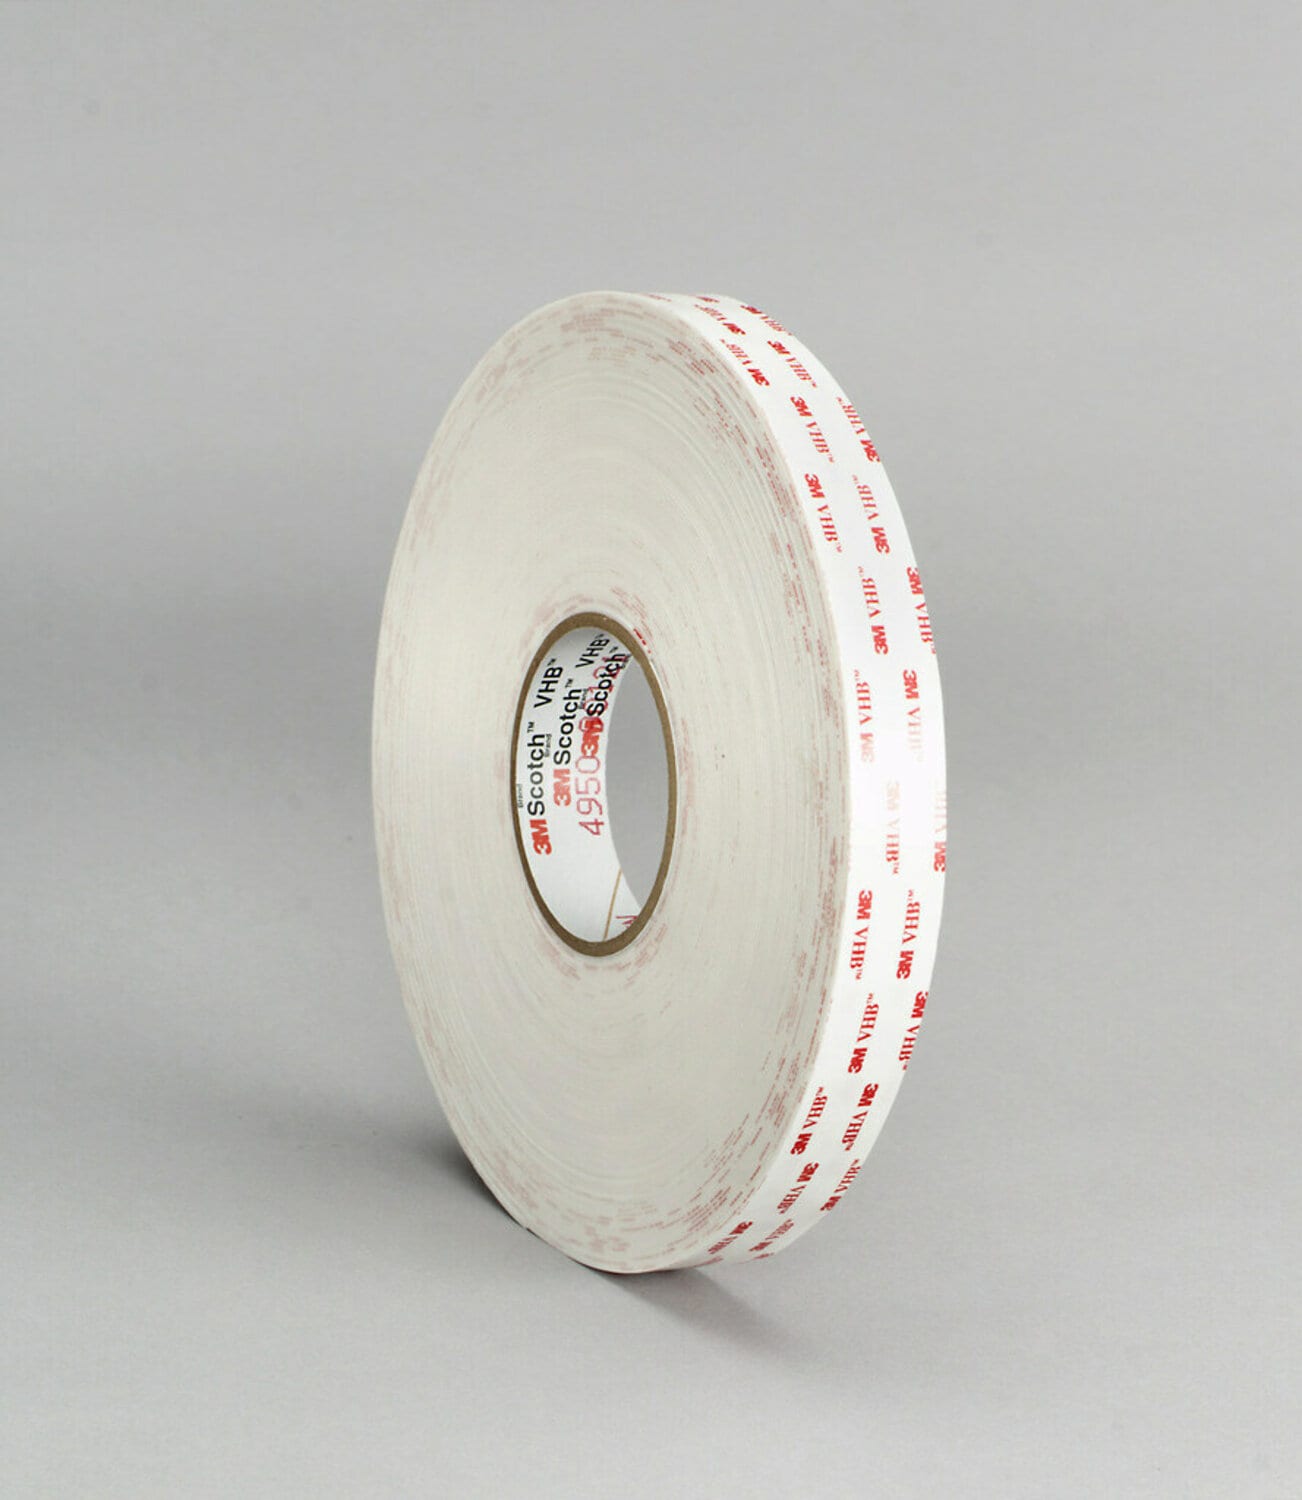 7000123487 - 3M VHB Tape 4930, White, 1 in x 72 yd, 25 mil, Small Pack, 2 Roll/Case